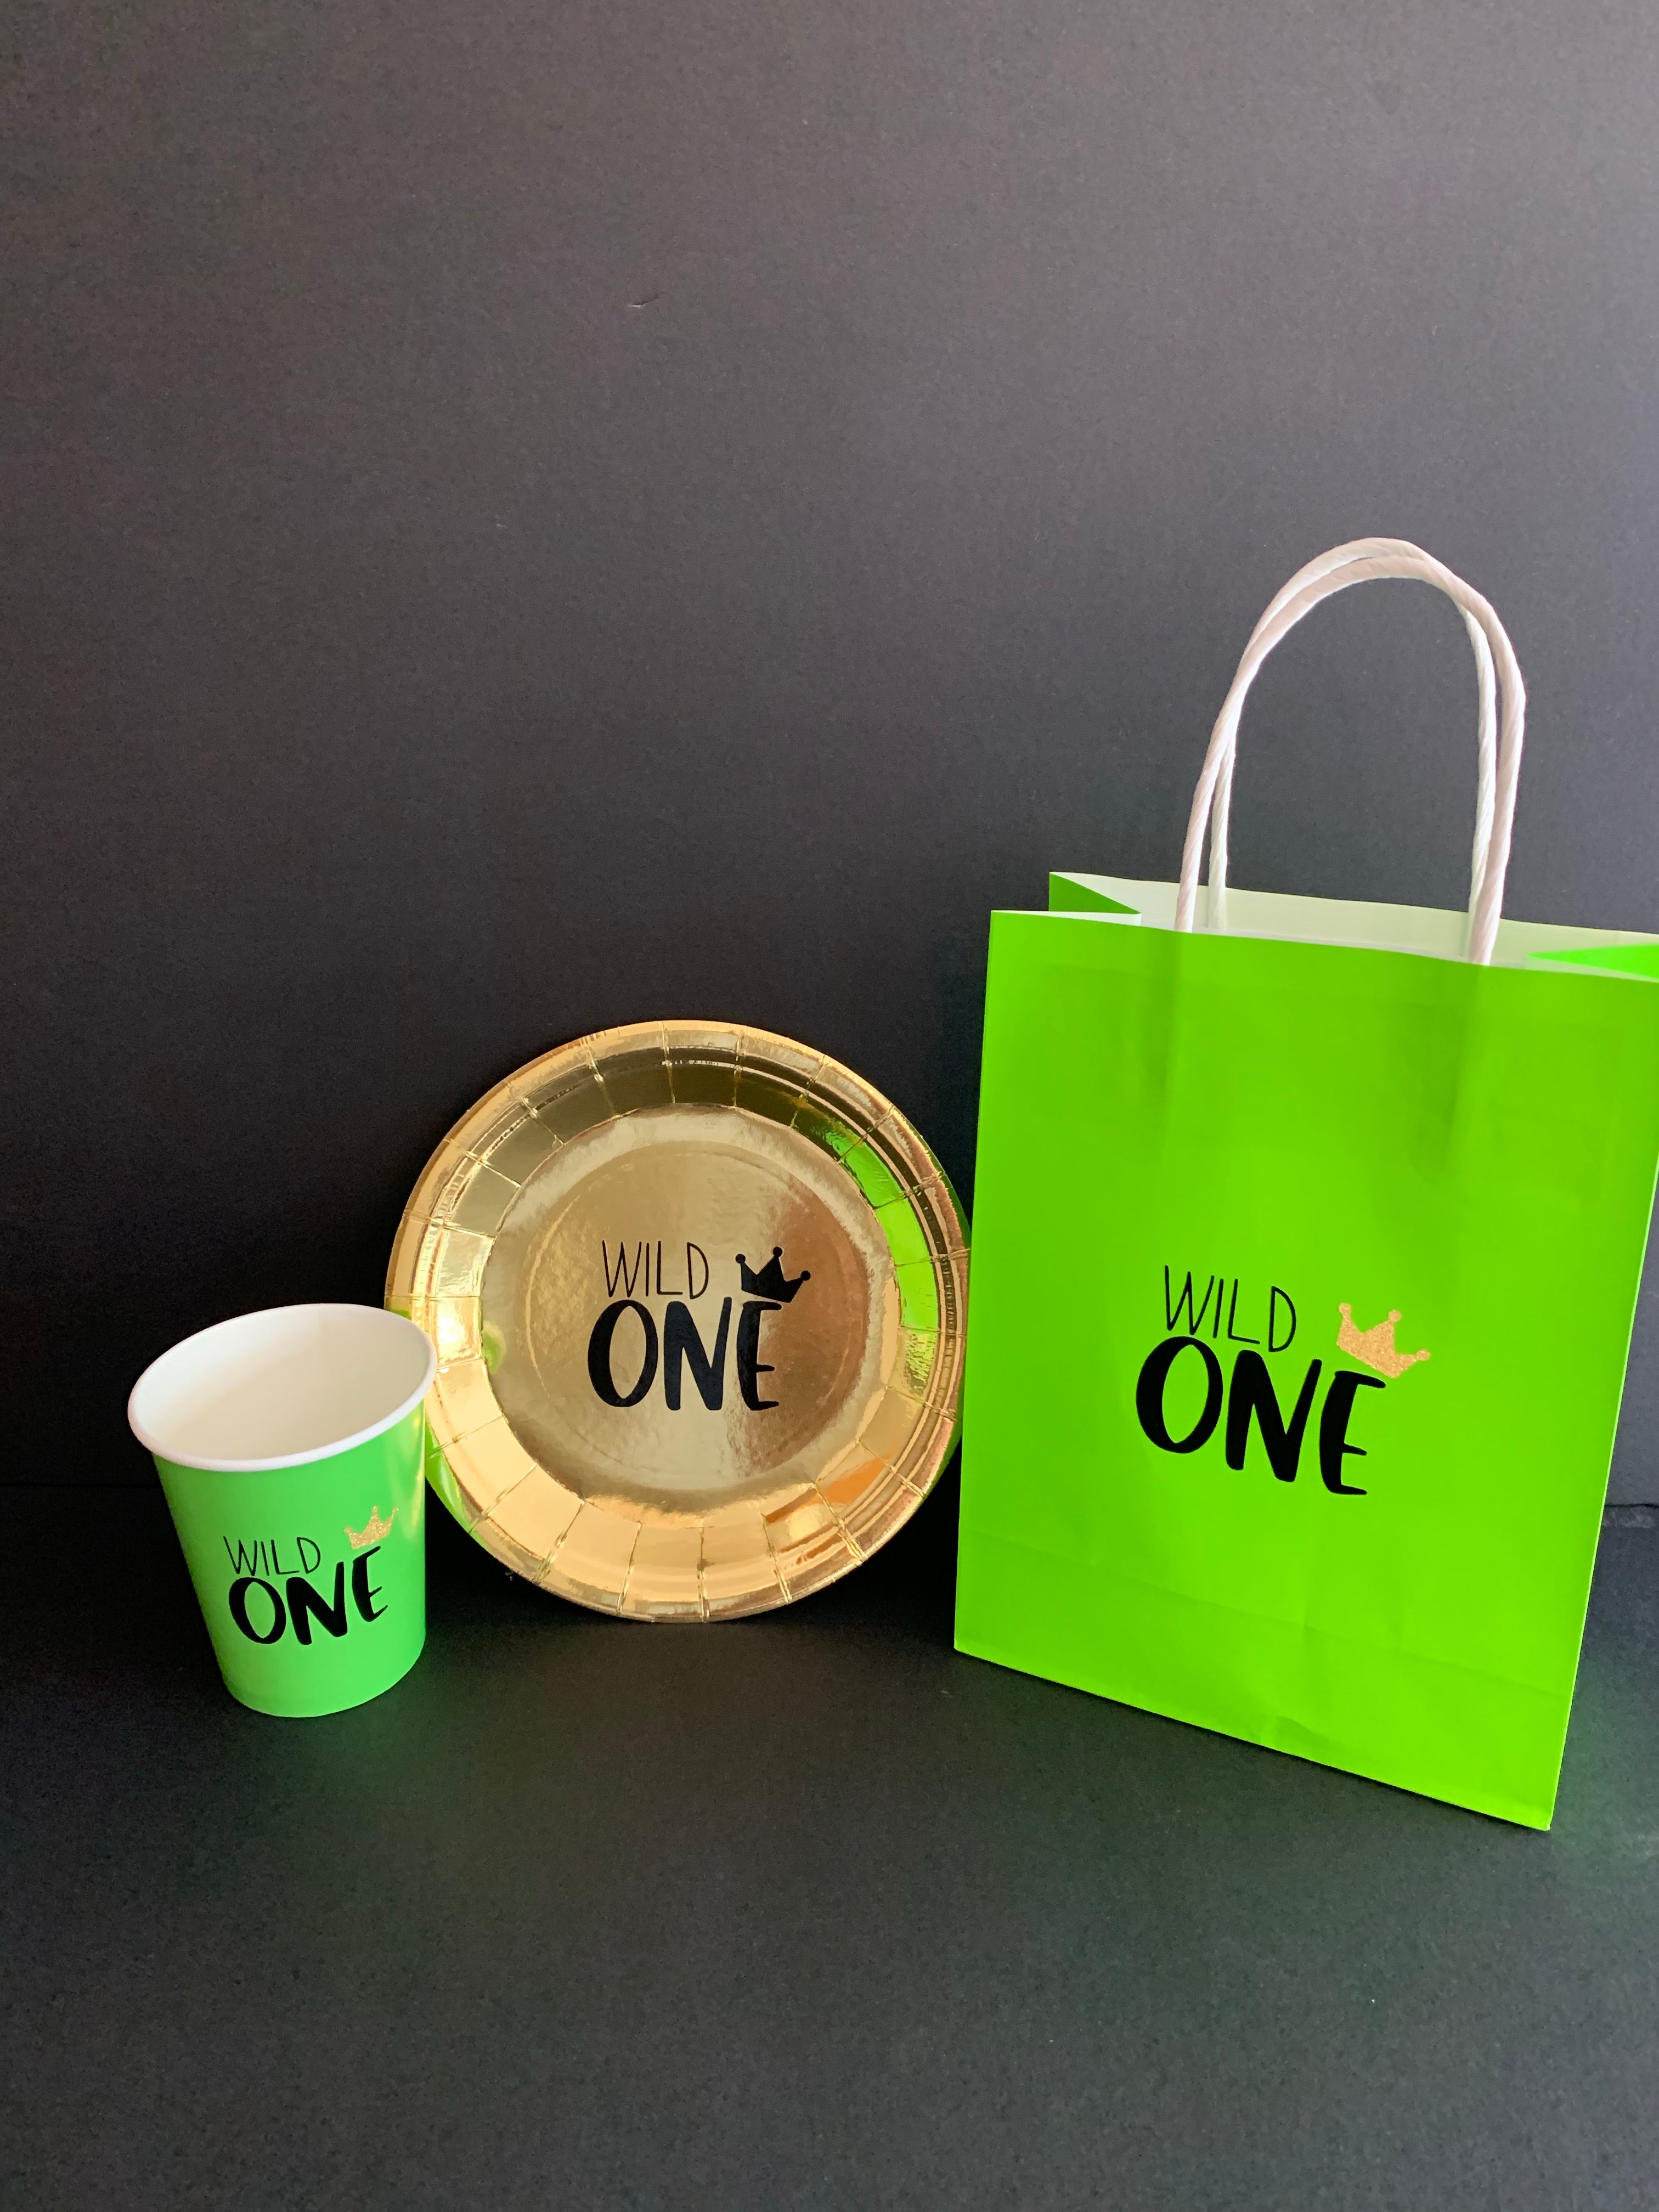 Wild one party supplies